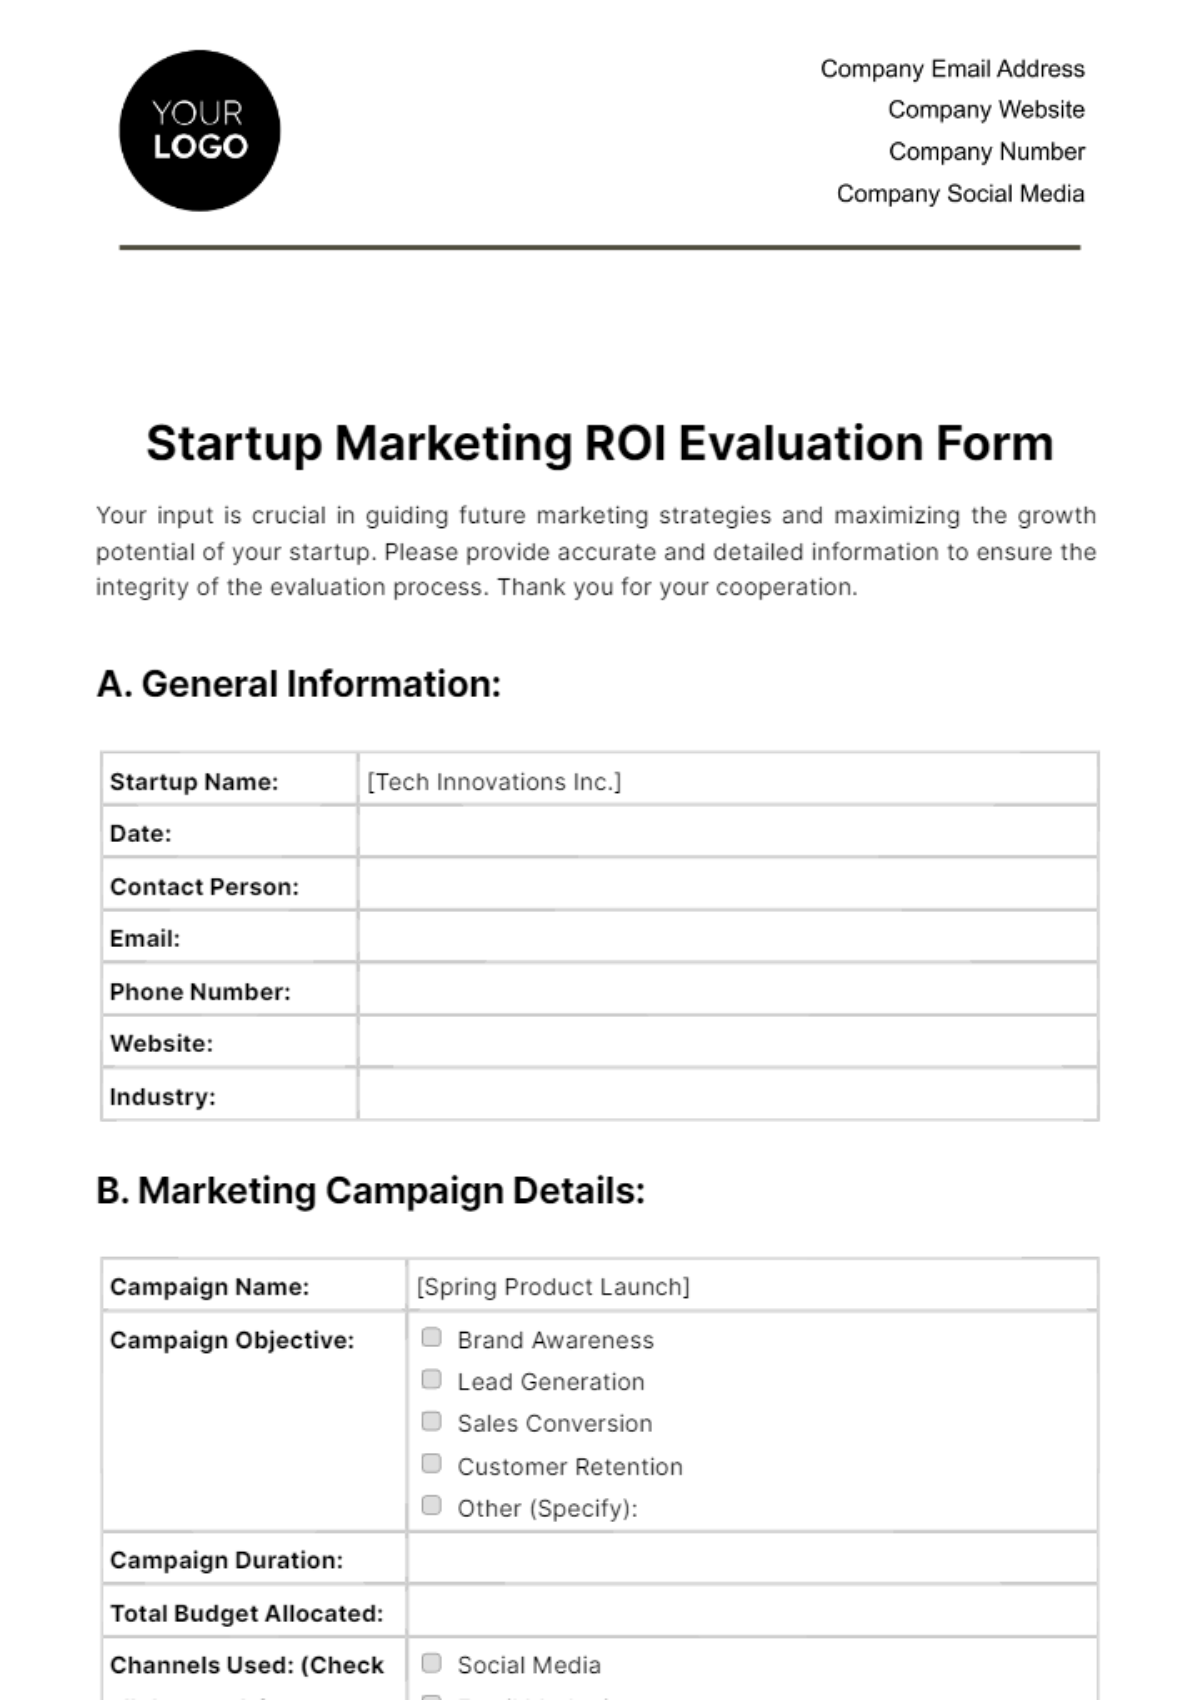 Free Startup Marketing ROI Evaluation Form Template